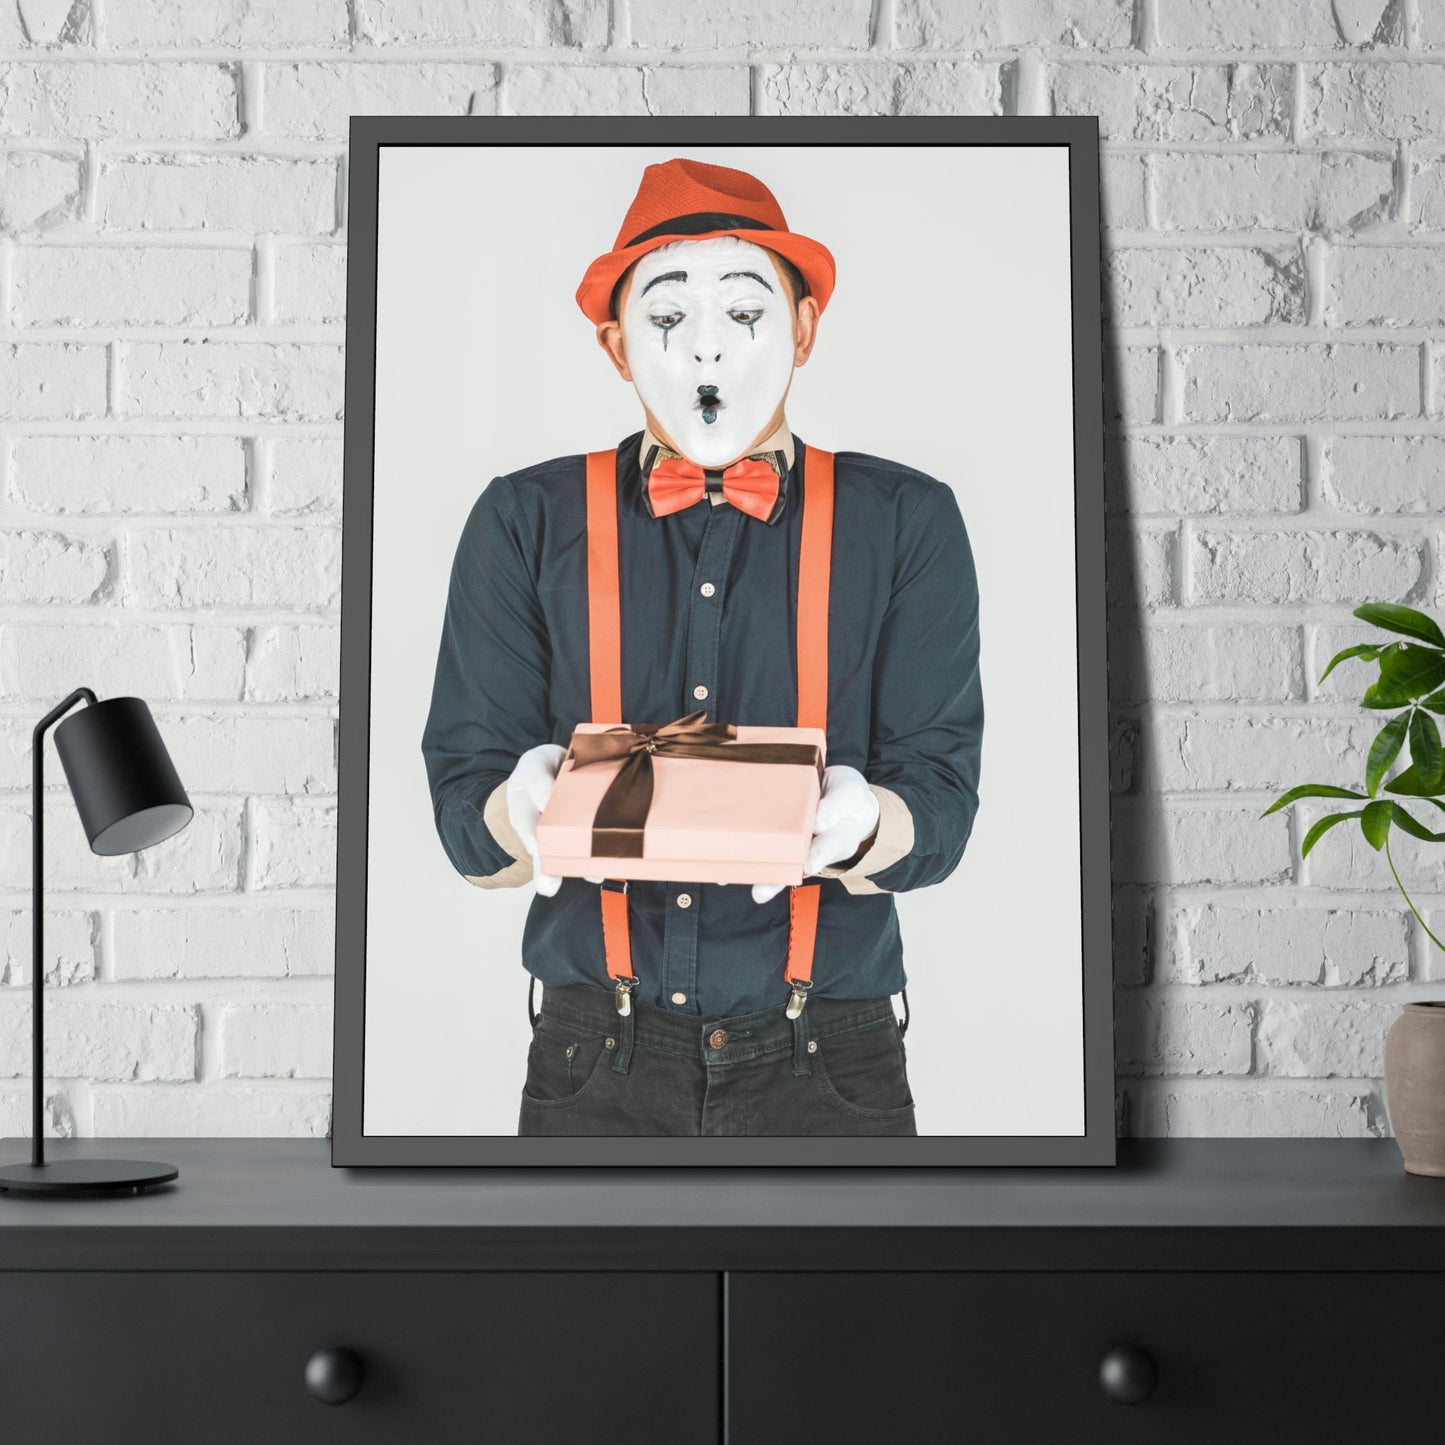 The Jester's Gallery: A Wall Art Collection of Whimsical Comedy Scenes